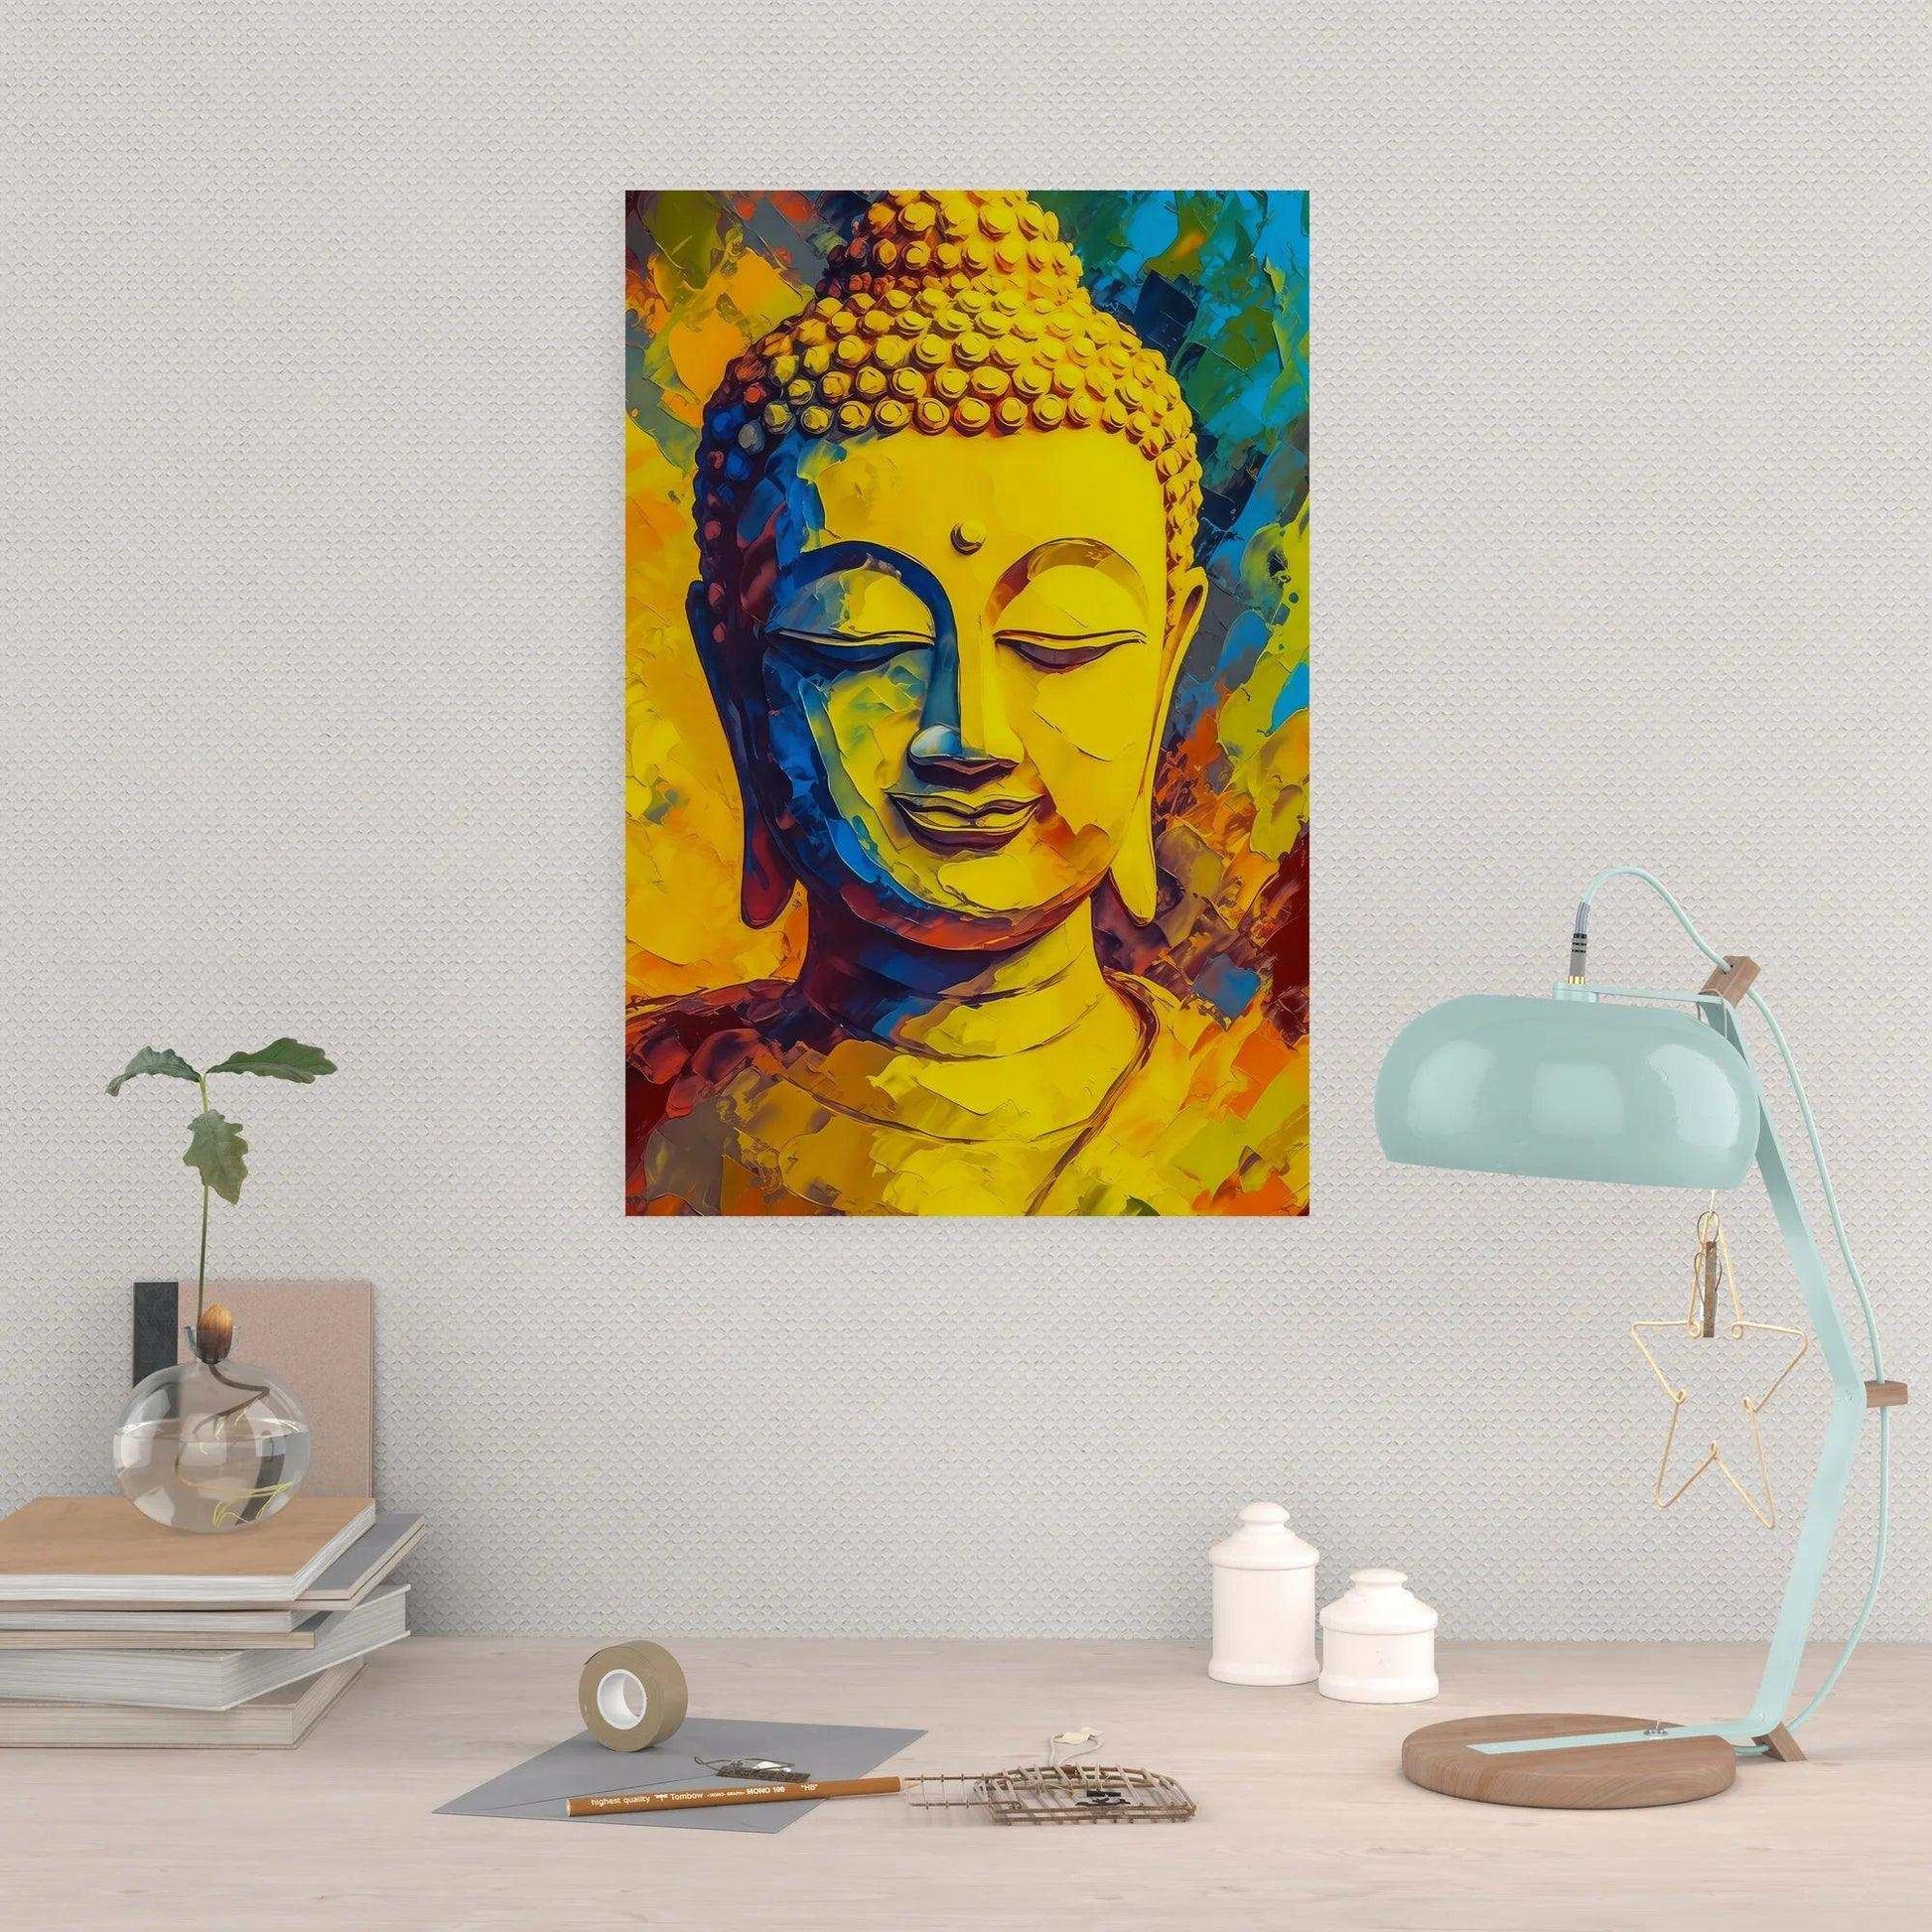 A vividly colored Buddha portrait with expressive yellow and orange tones hangs above a minimalist workspace with books, a vase with a young plant, and a turquoise lamp with a dangling star ornament.